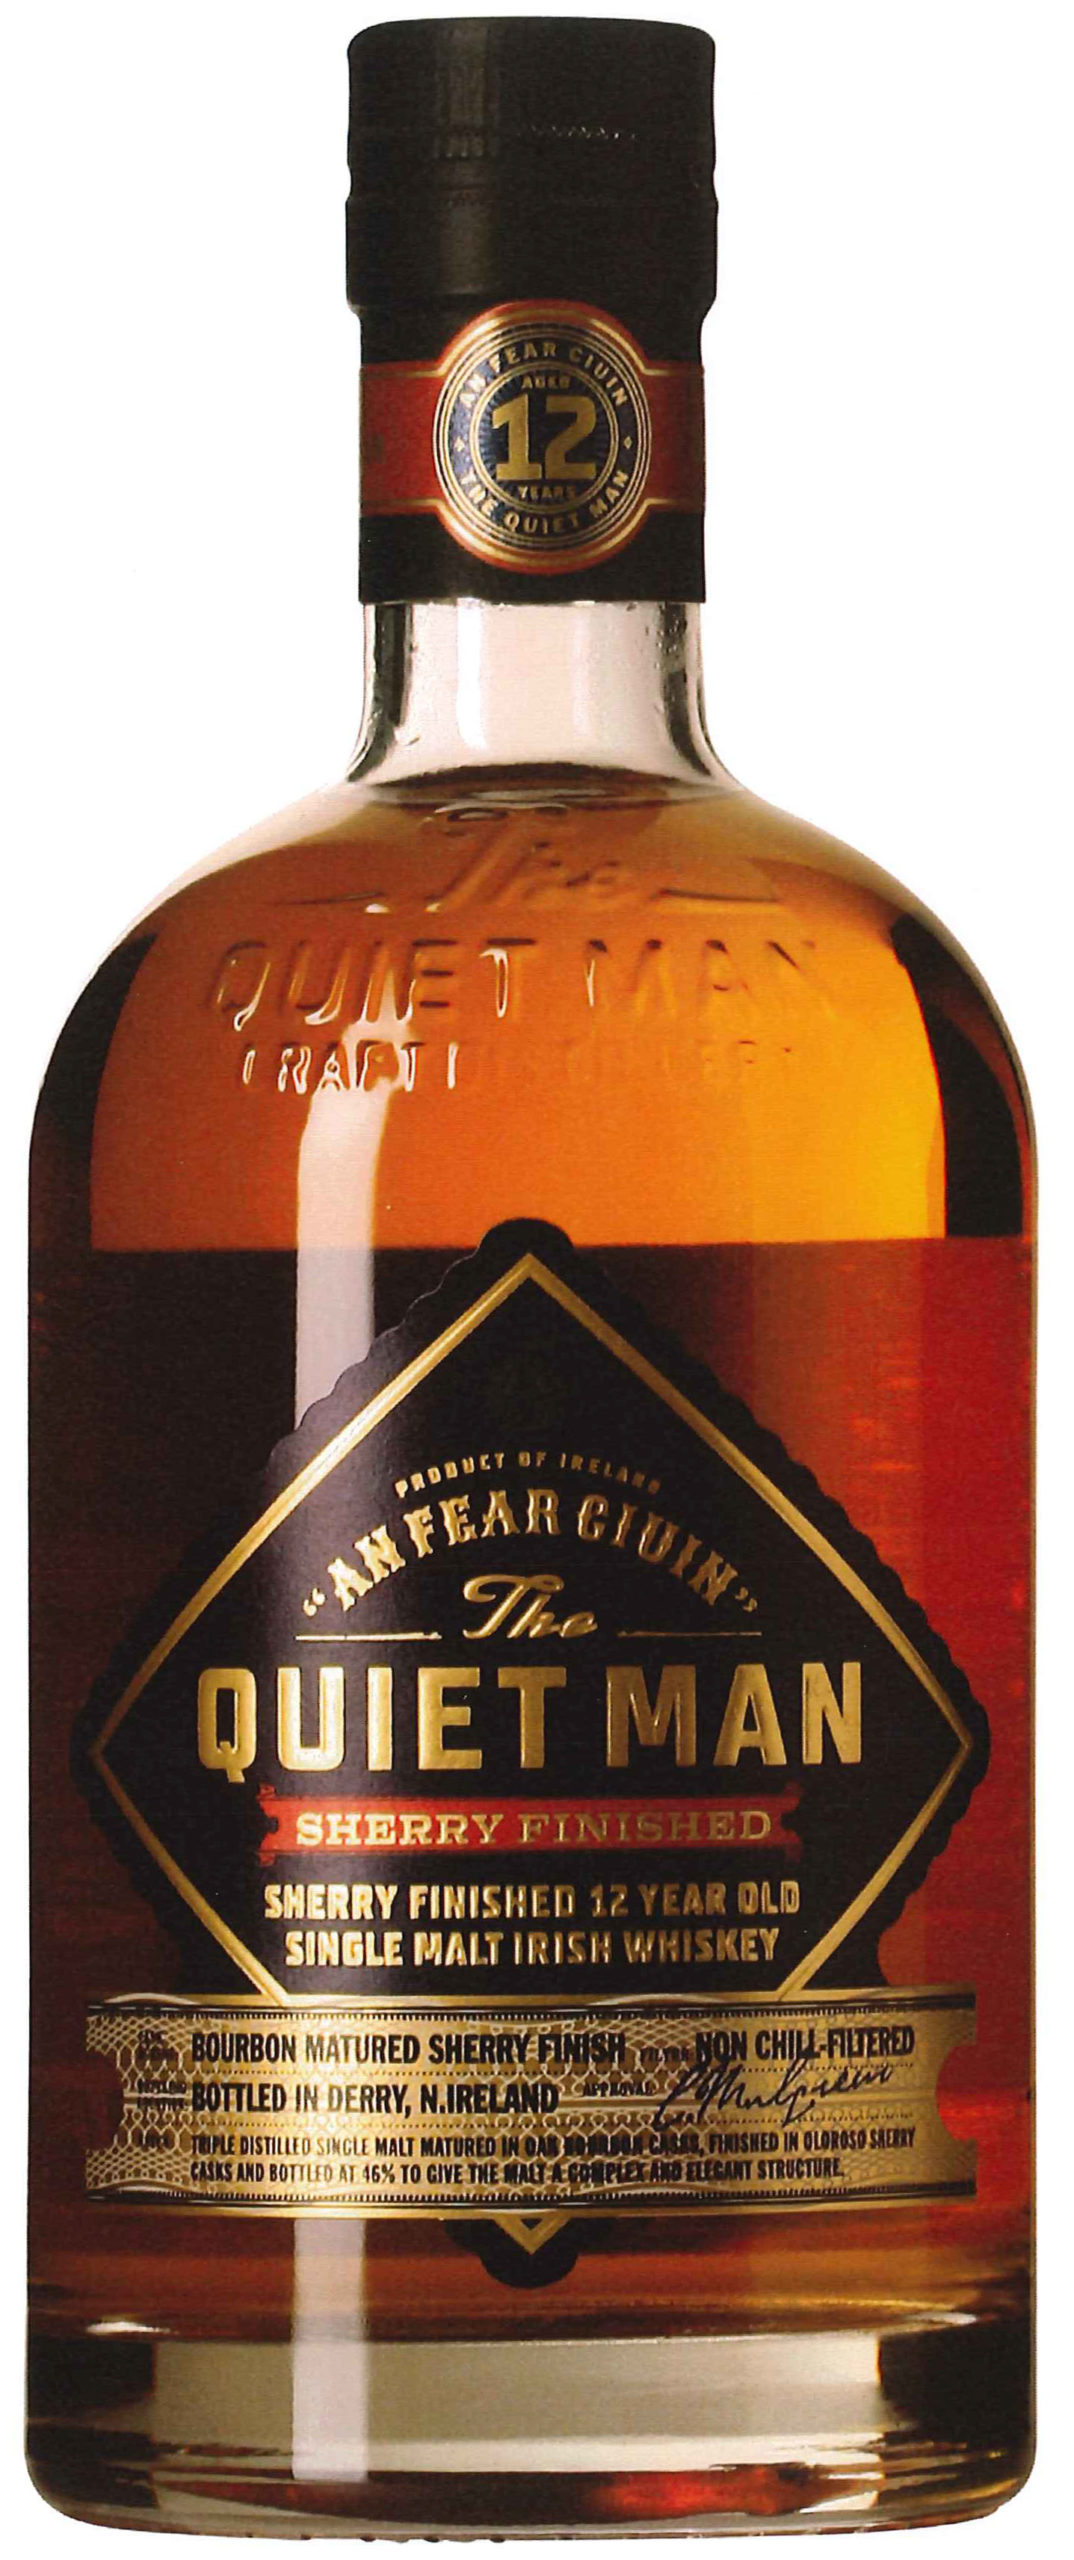 The Quiet Man 12 Year Old Sherry Cask Single Malt